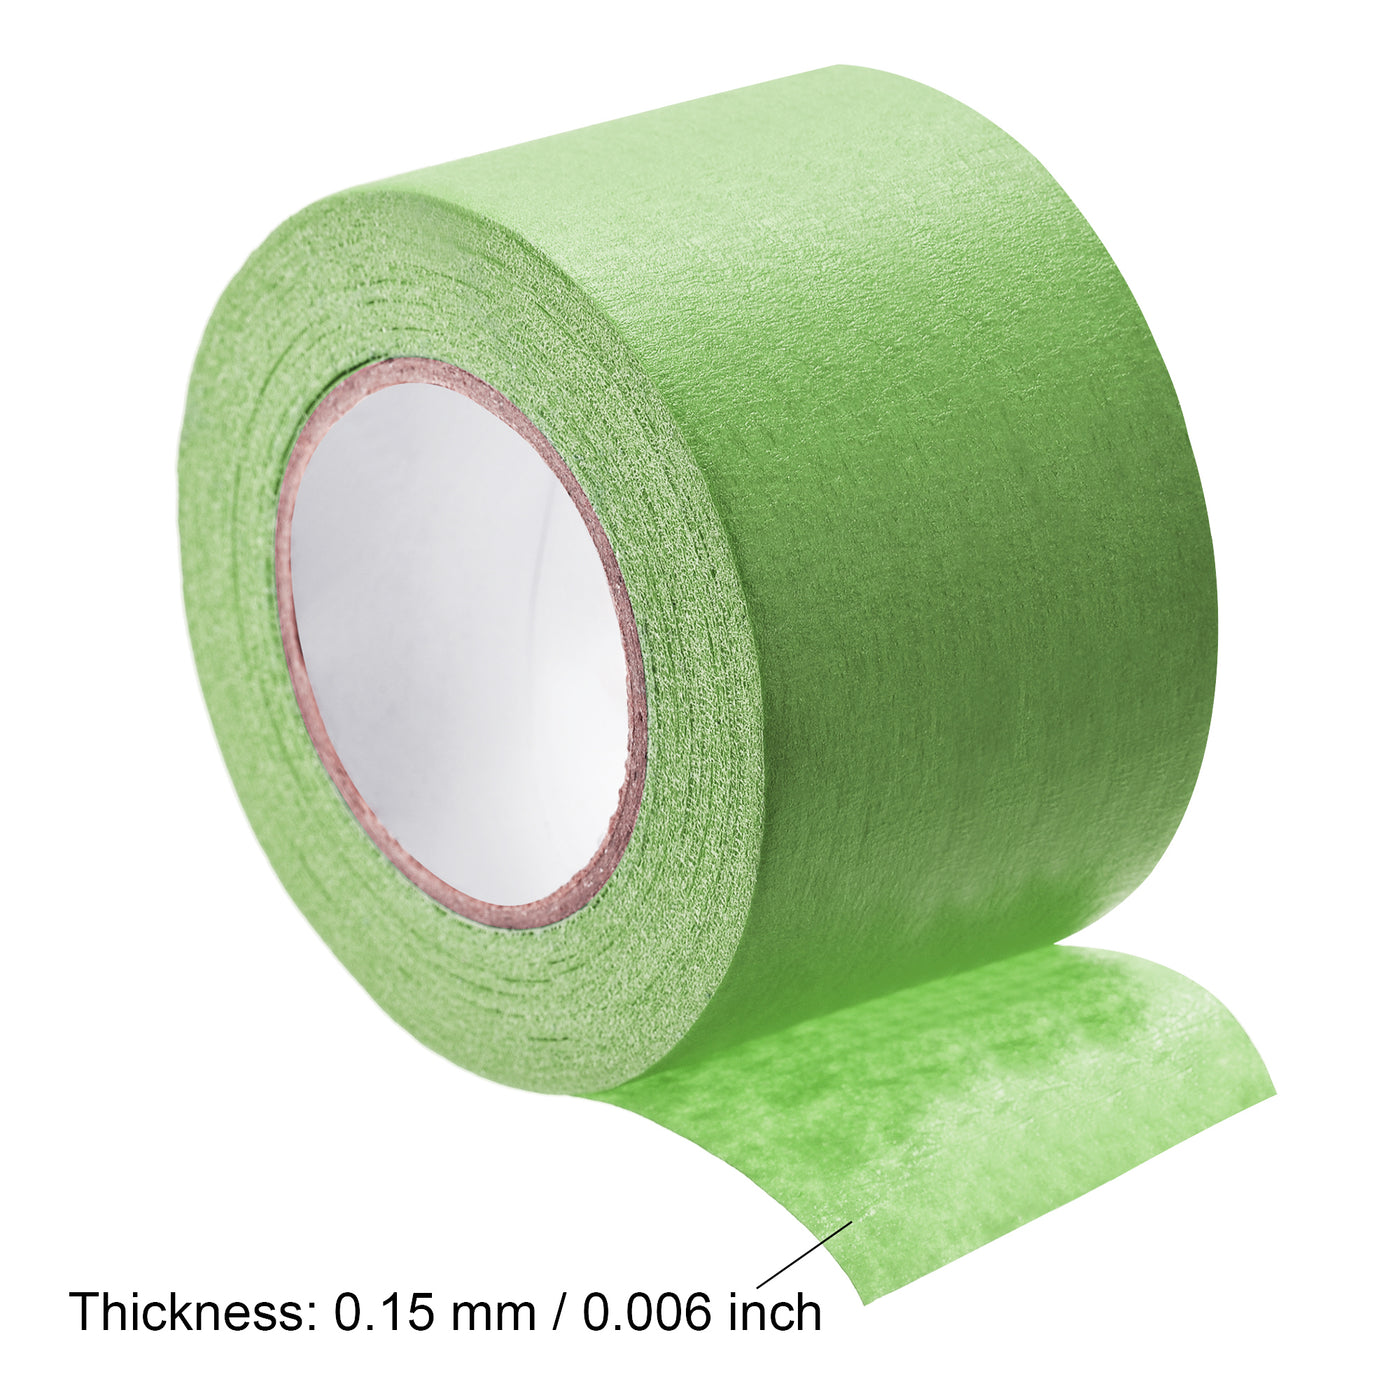 uxcell Uxcell 50mm 2 inch Wide 20m 21 Yards Masking Tape Painters Tape Rolls Light Green